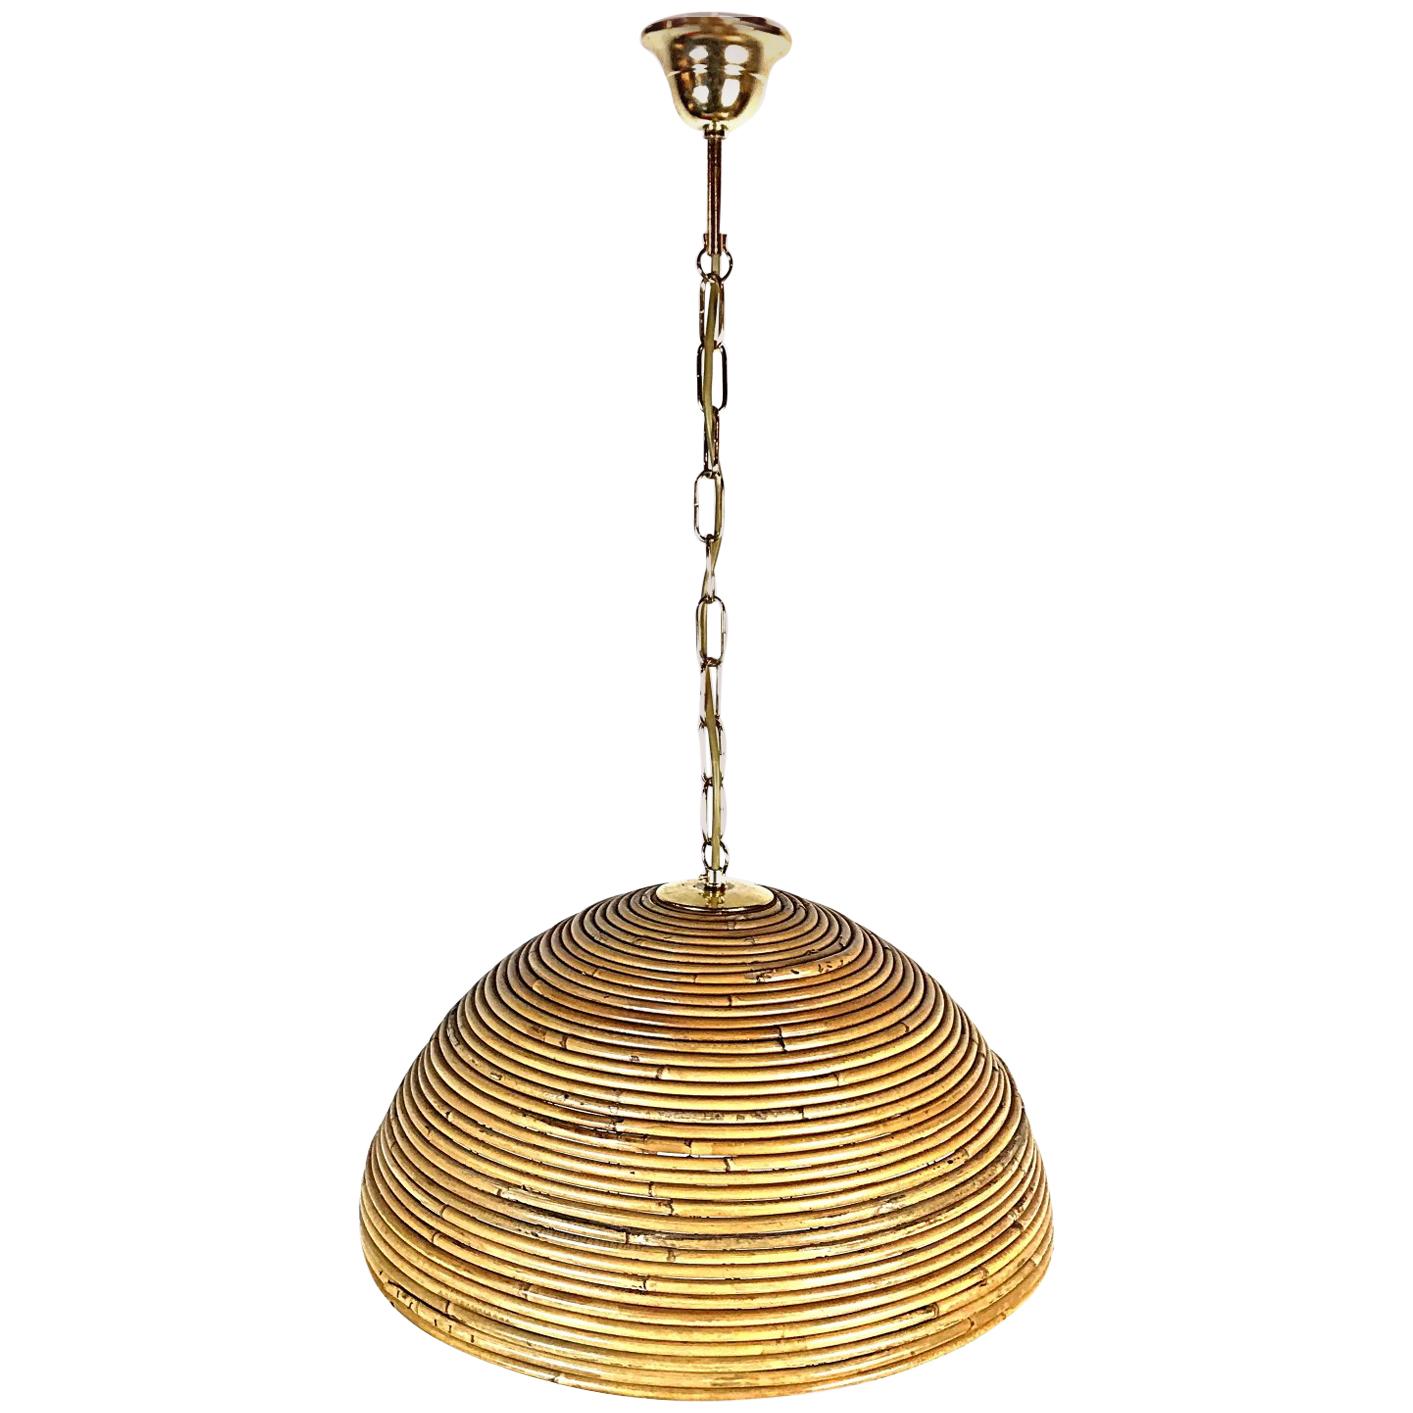 Crespi Style Mid-Century Modern Bamboo and Brass Pendant Light, Italy, 1950s